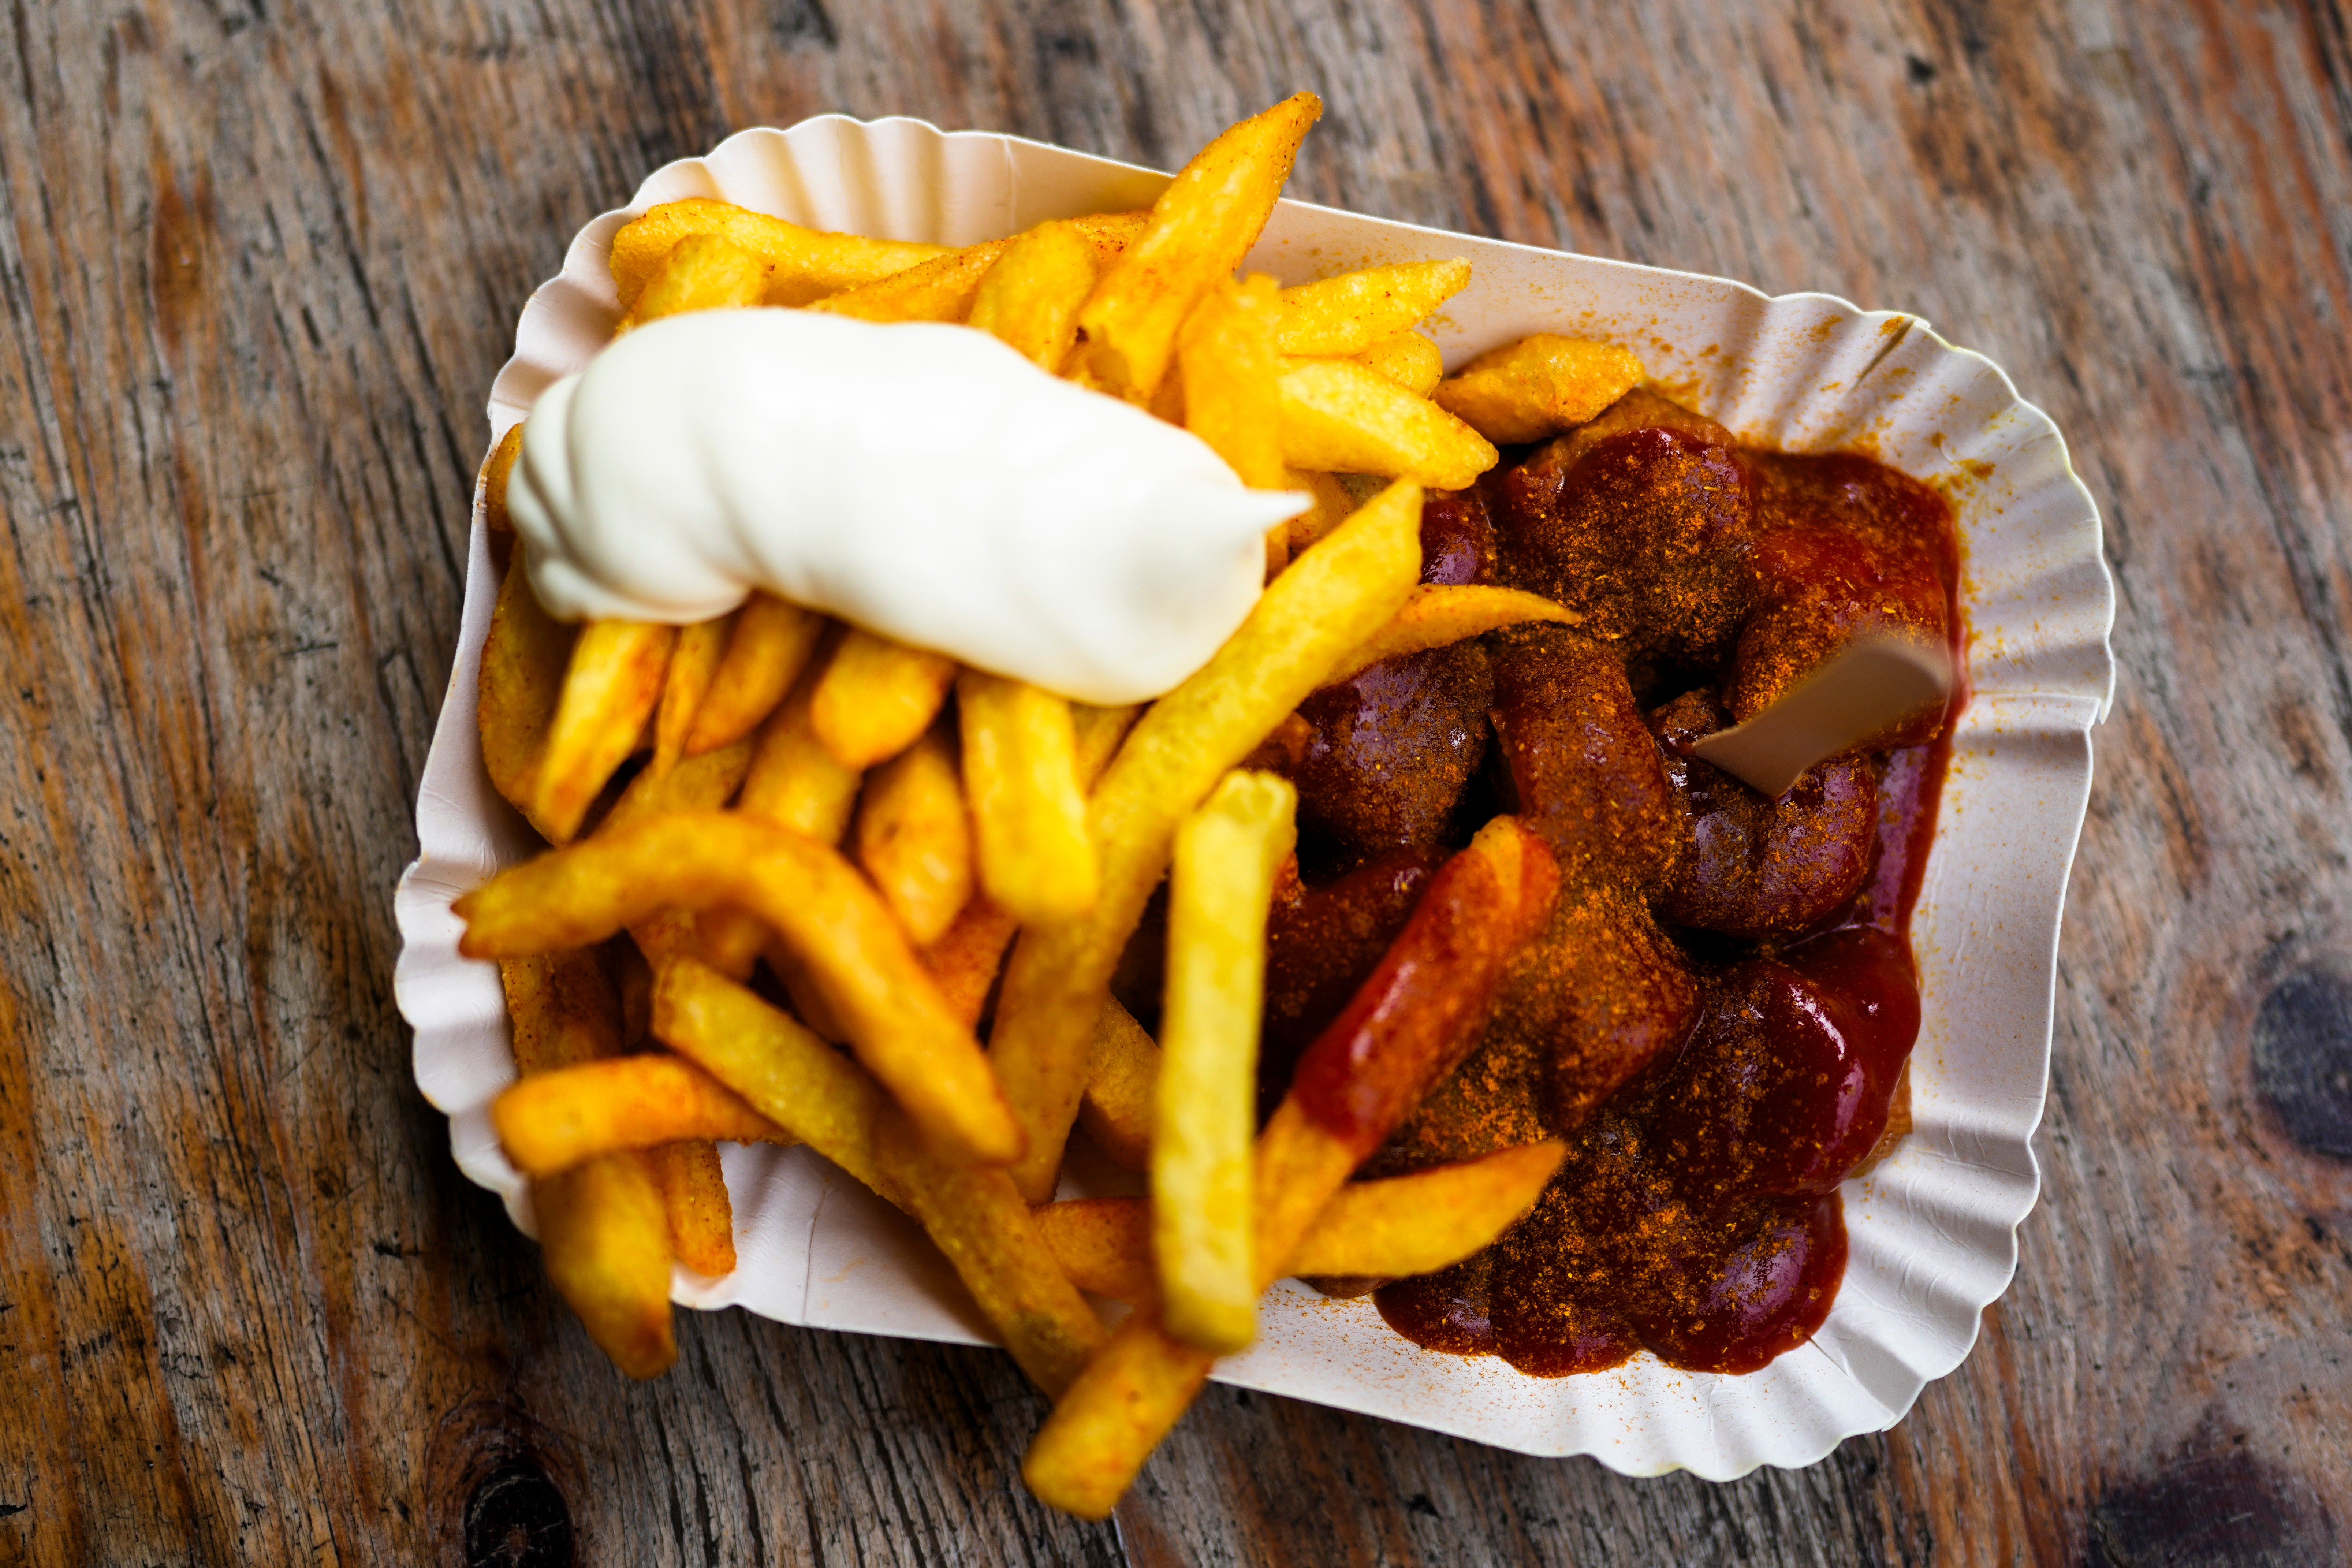 Currywurst, Germany’s sausage with curry sauce, served on a cardboard platter with French fries and mayonnaise